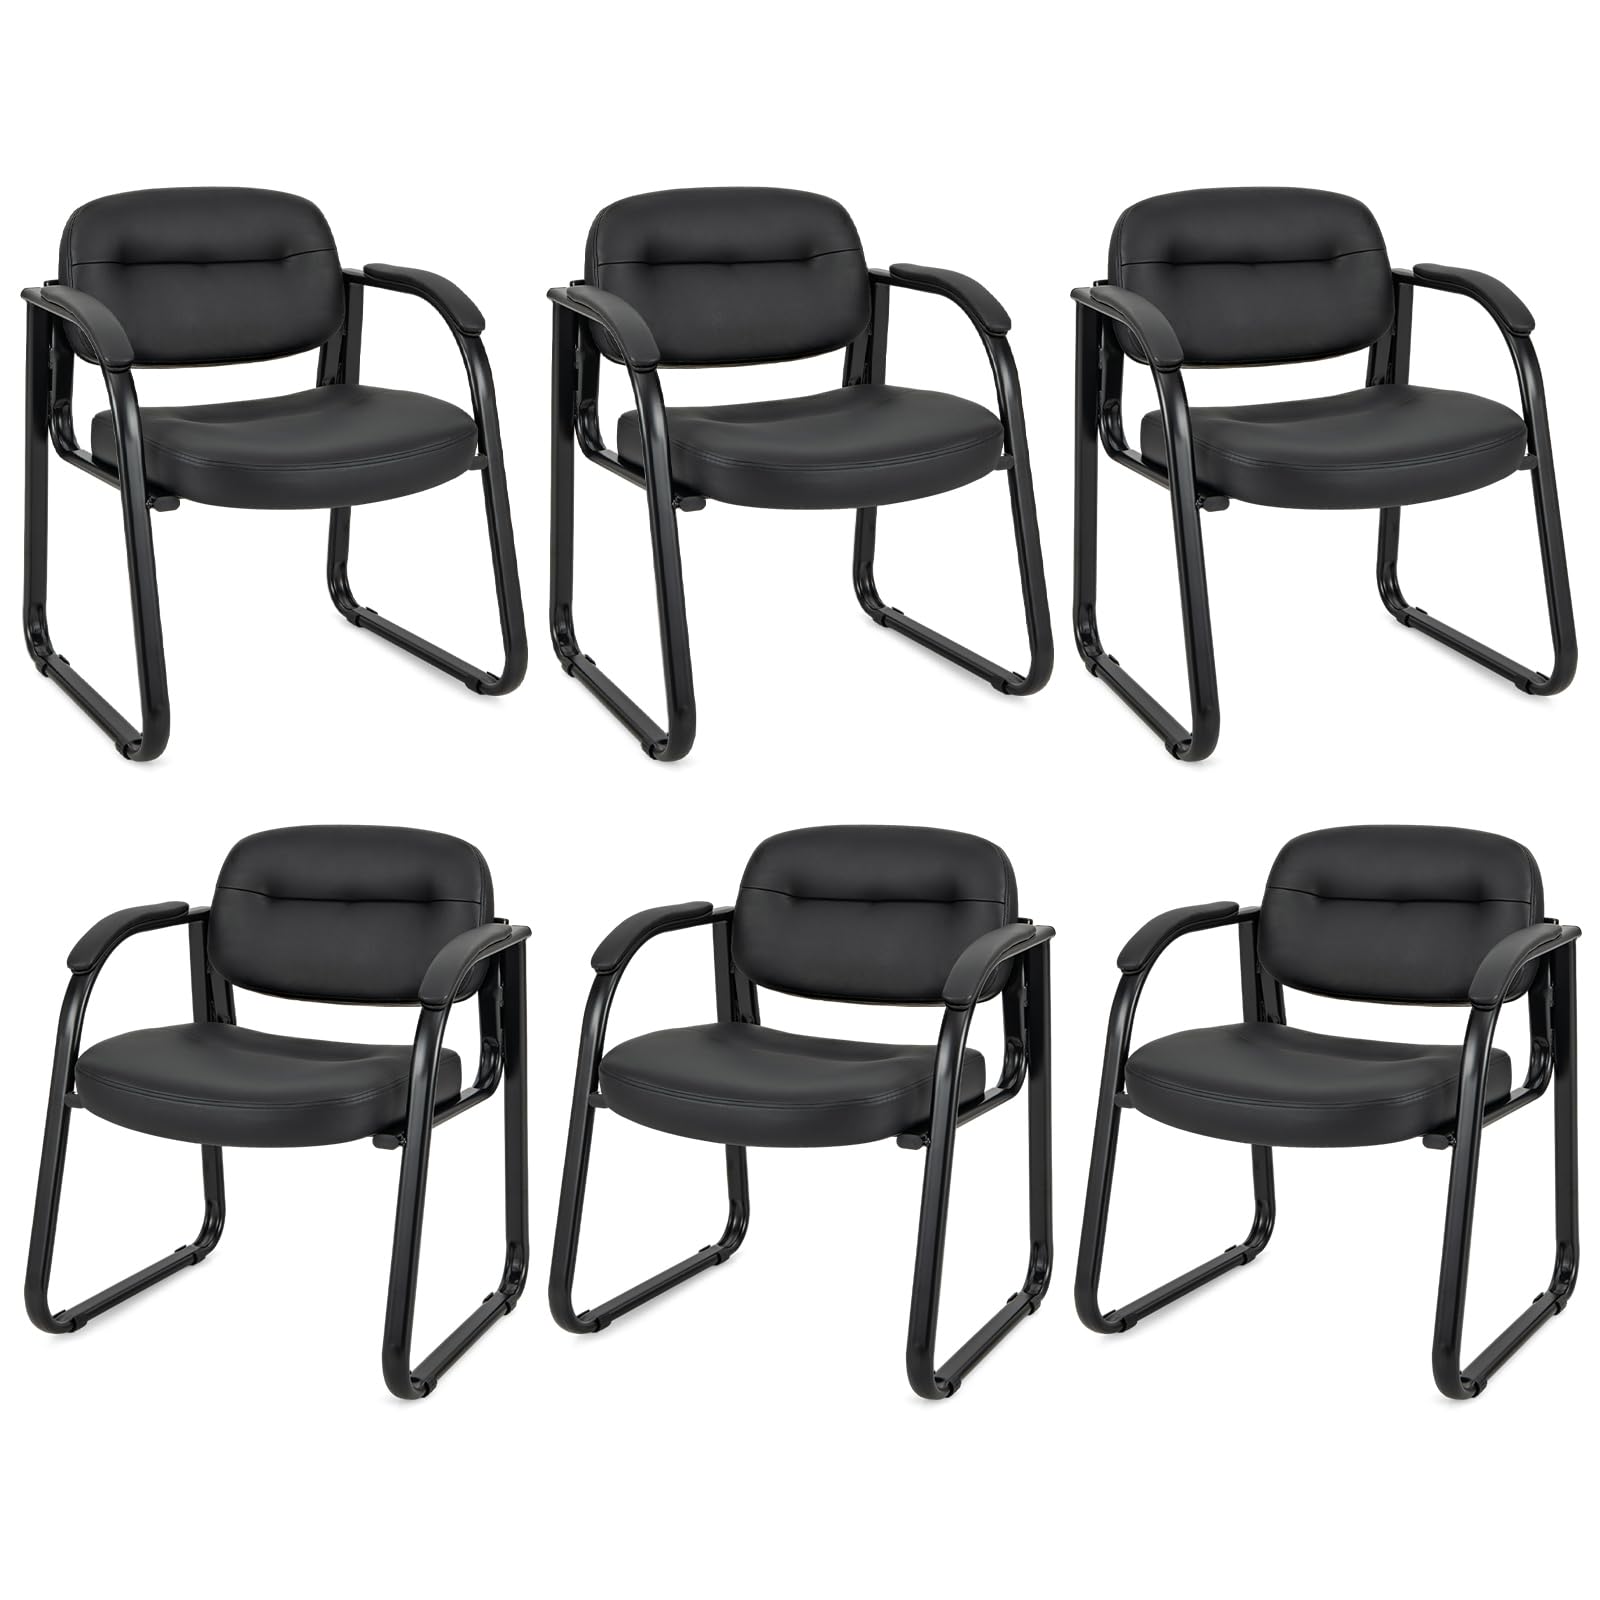 Giantex Waiting Room Chairs Set - Reception Chairs